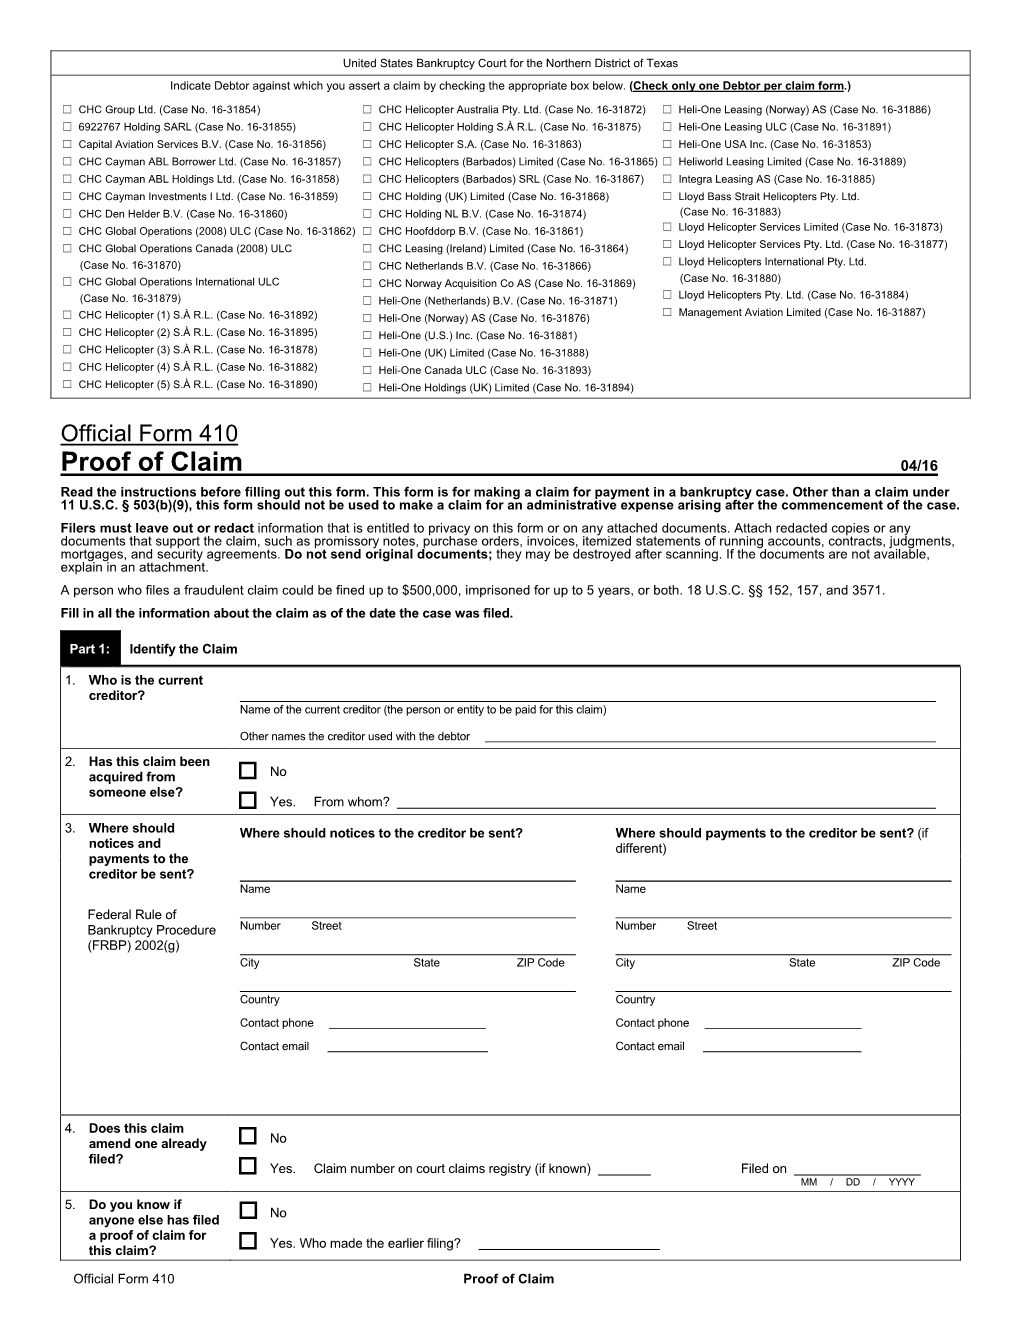 Proof of Claim 04/16 Read the Instructions Before Filling out This Form